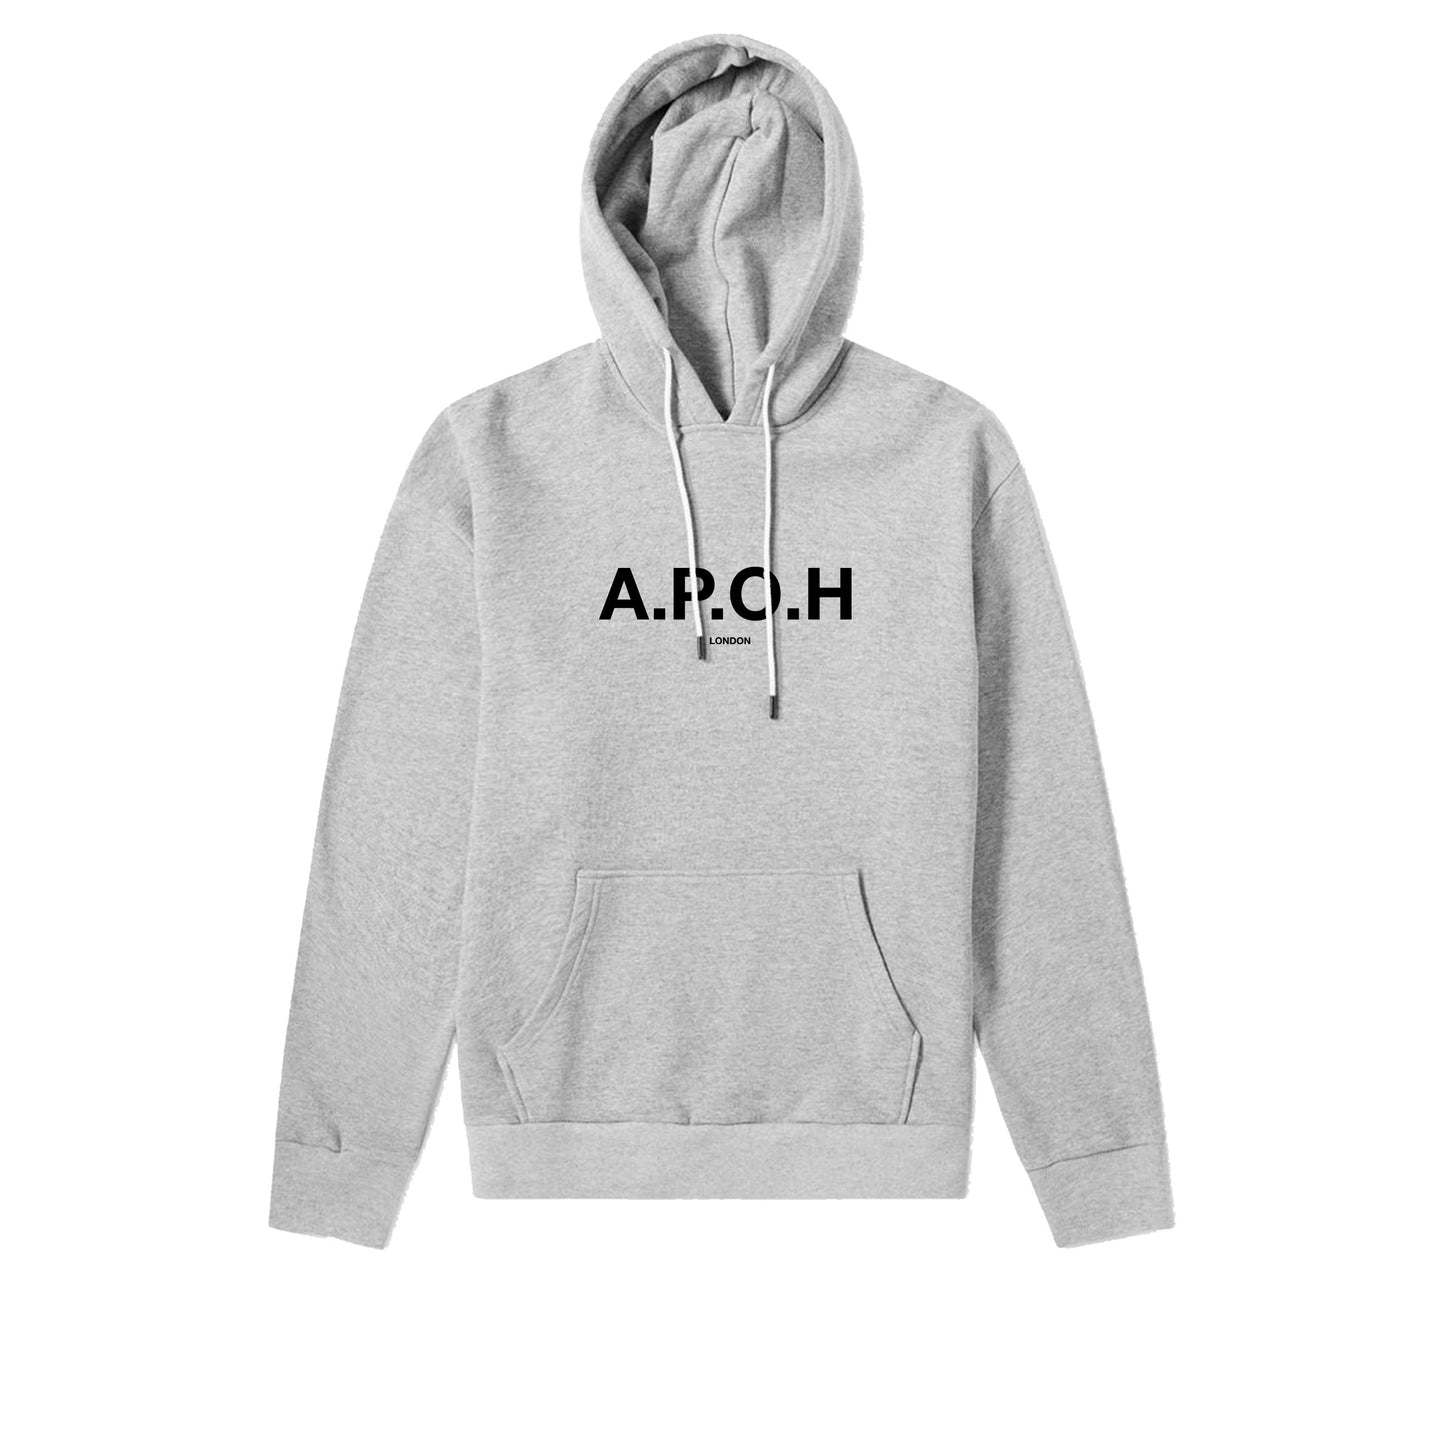 A.P.O.H ORIGINALS SUSTAINABLE HOODIE